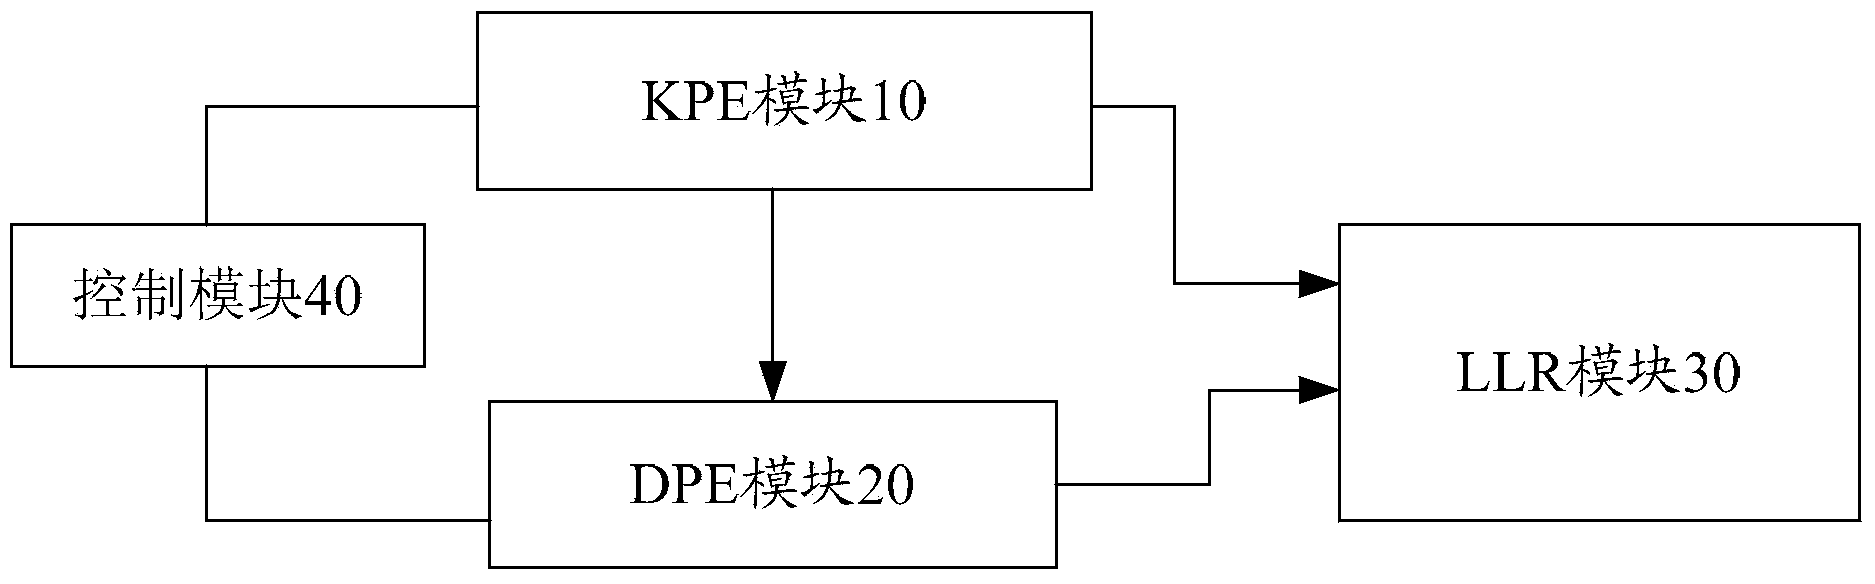 MIMO (Multiple Input Multiple Output) signal detection method and detector on basis of K-Best algorithm